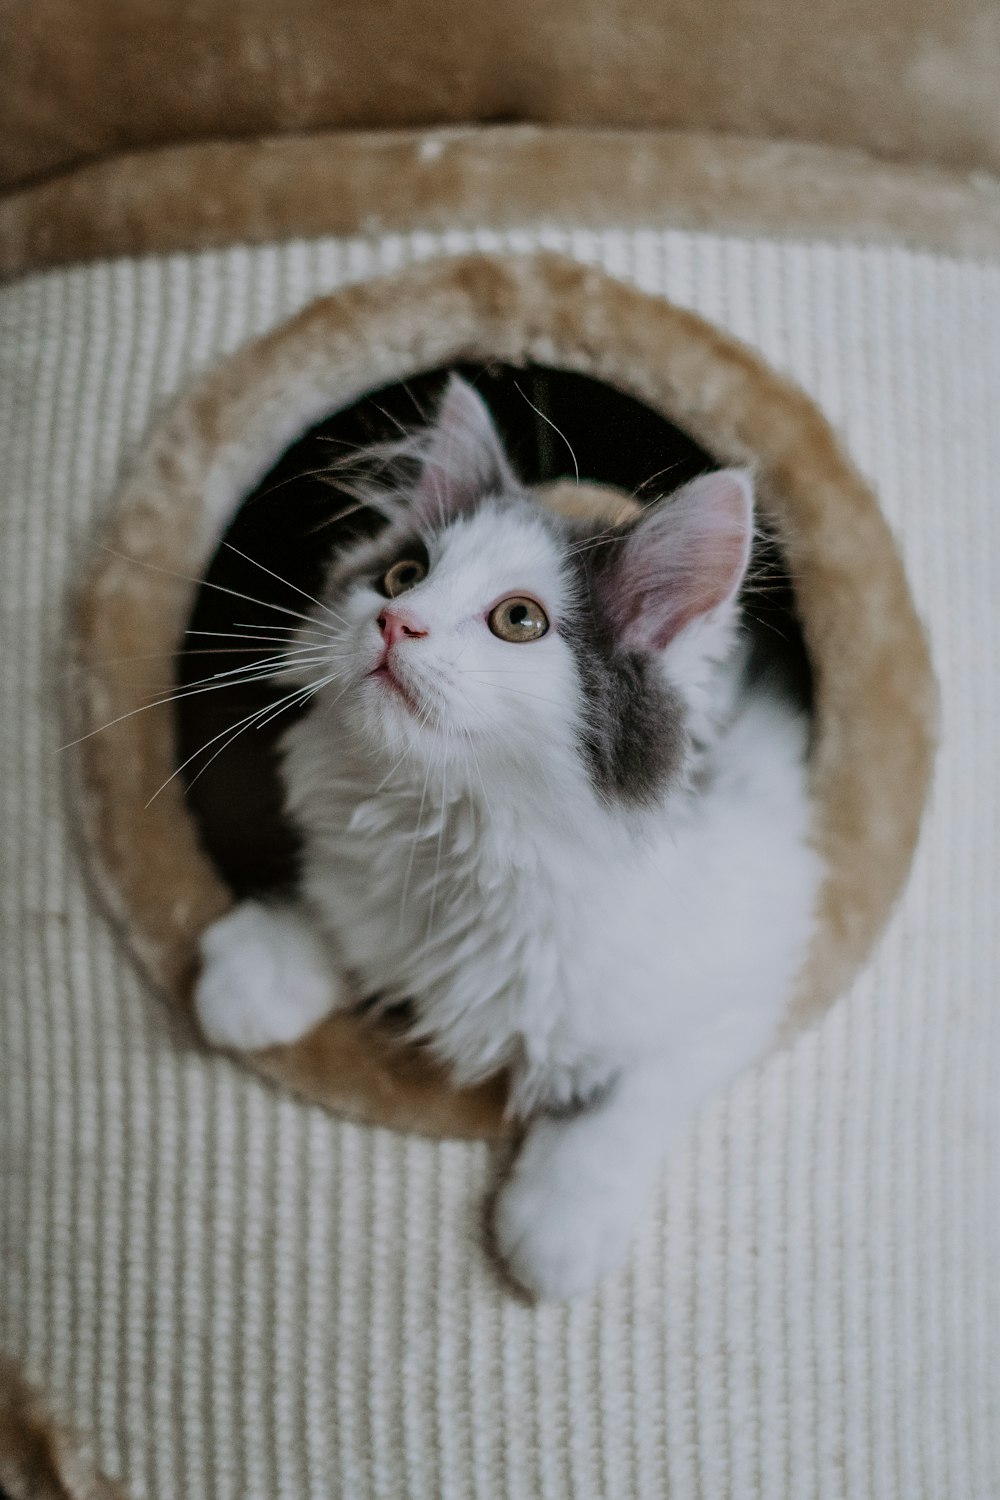 a cat sitting in a cat bed looking up